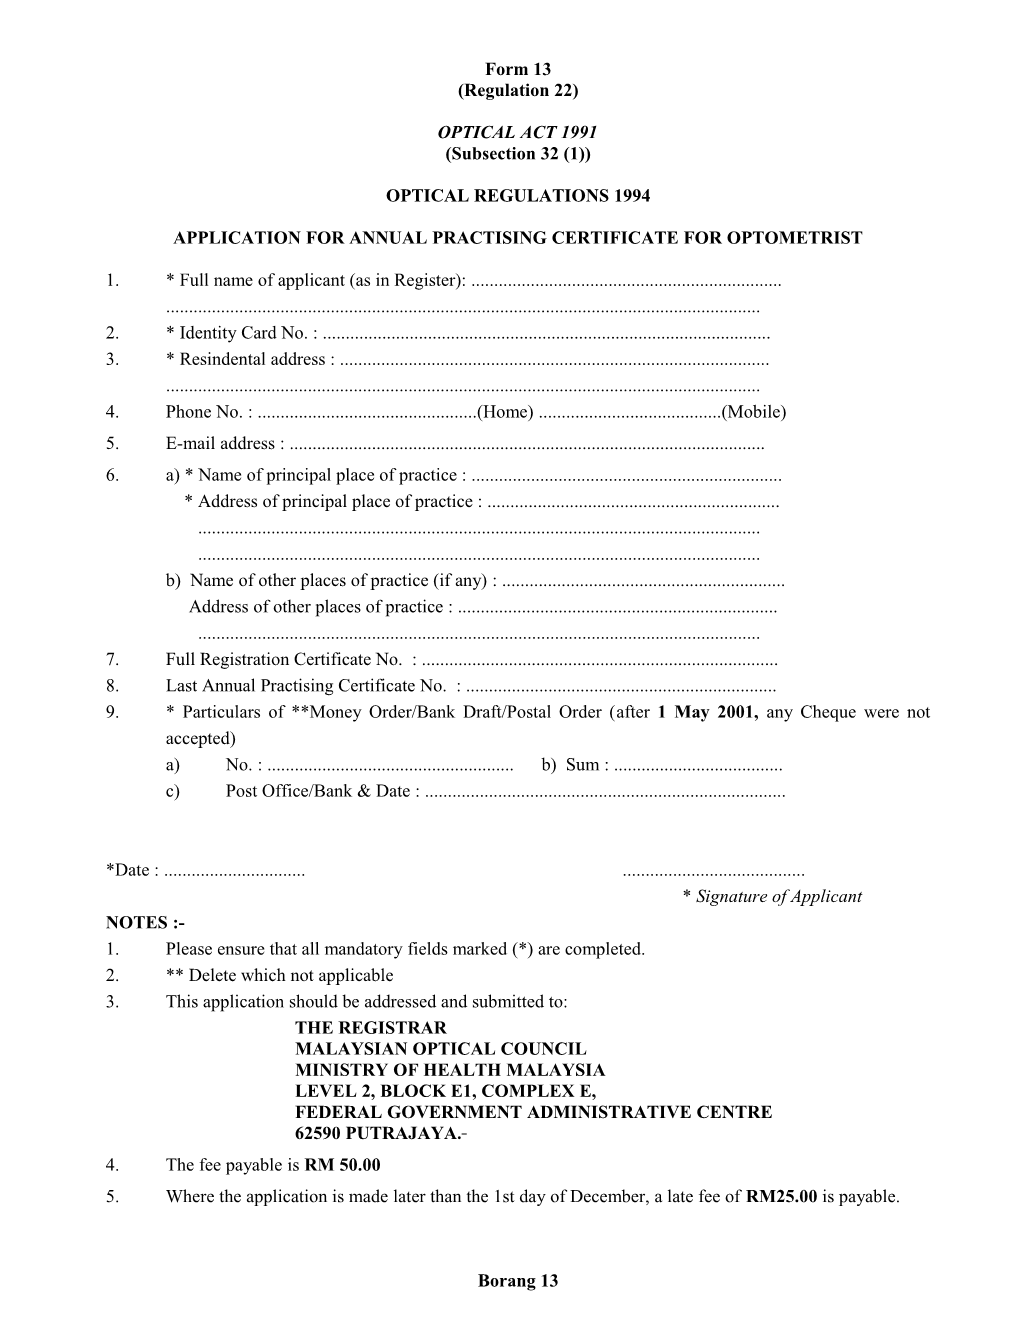 Application for Annual Practising Certificate for Optometrist